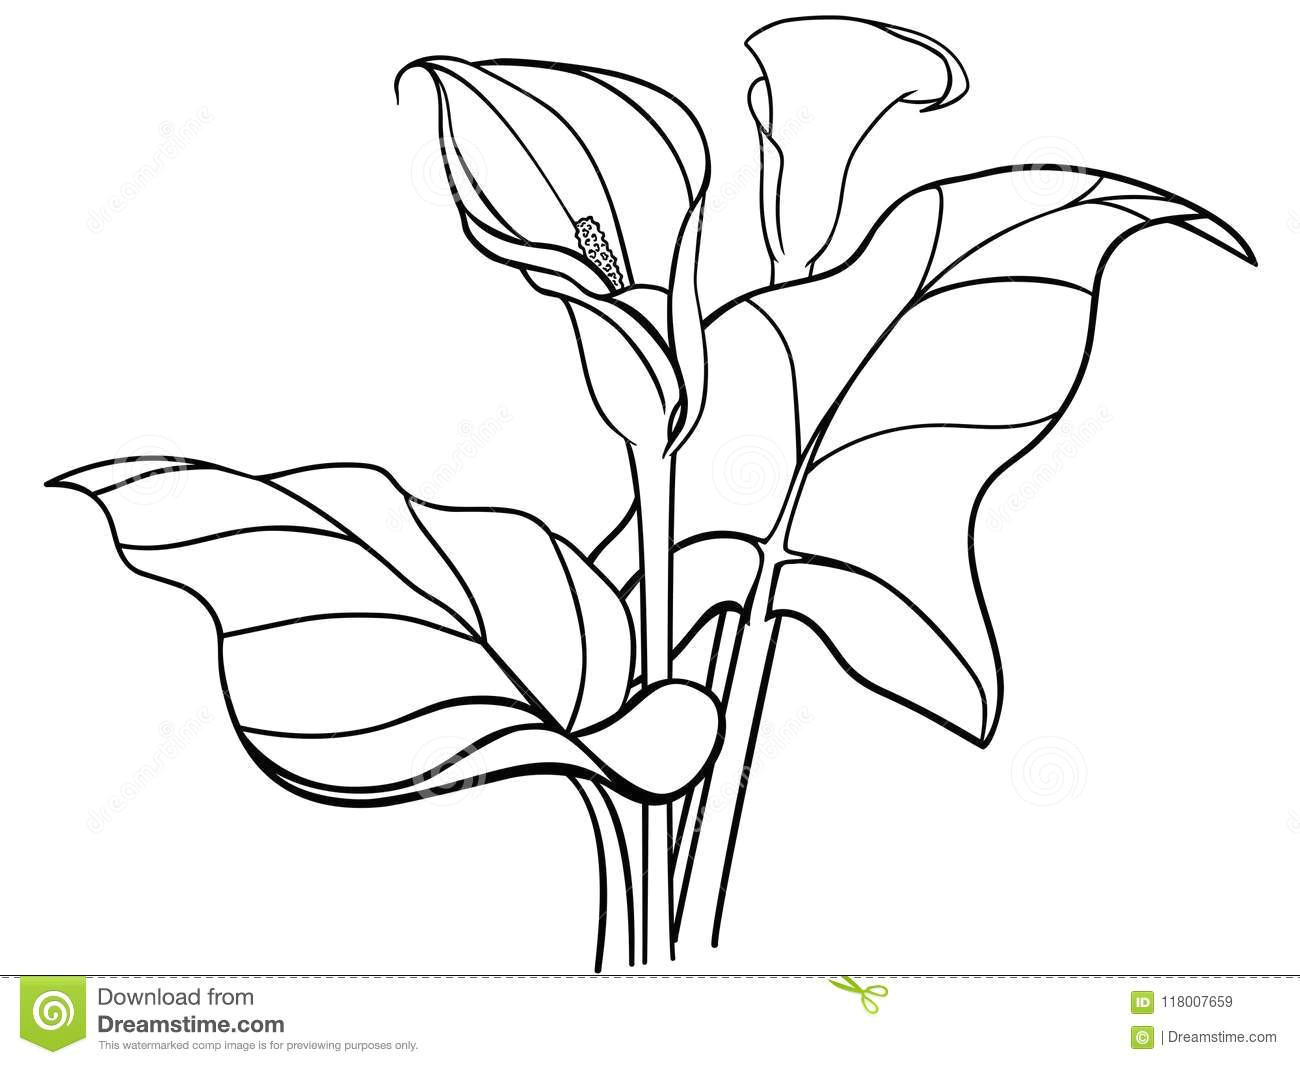 Drawing Of Flowers and Leaves Callas Flowers with Leaves Bouquet White Callas Lilies Line